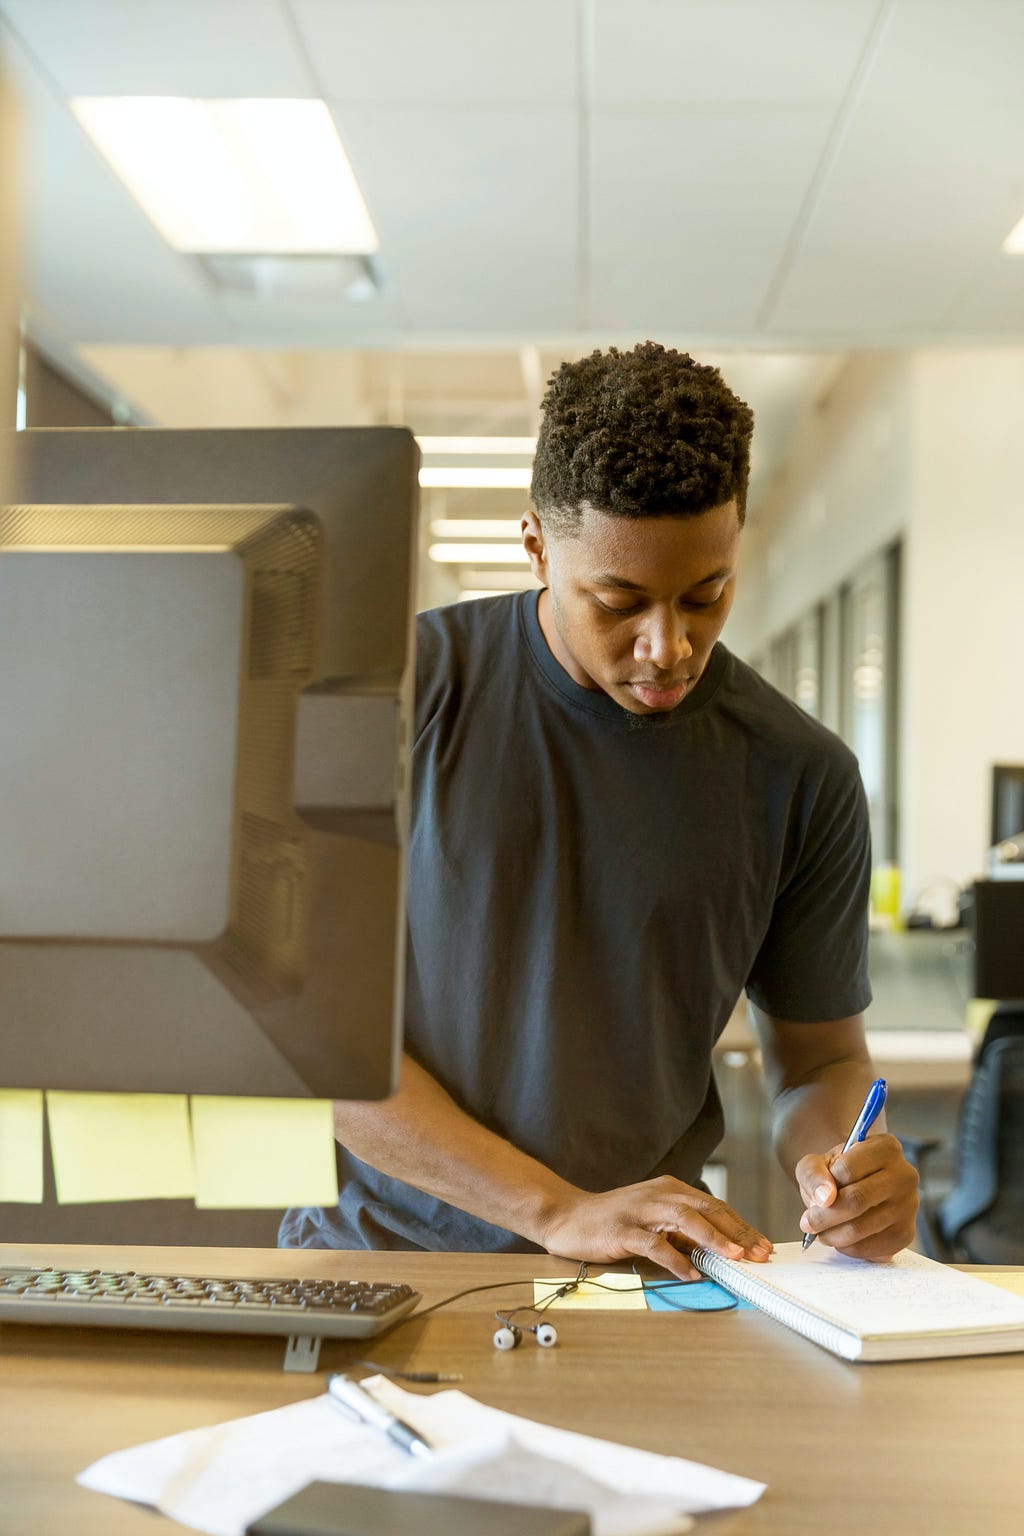 modern office setting. strip lighting, bland everything. a young man stood in front of a computer writes on a pad of paper to his left (camera right)